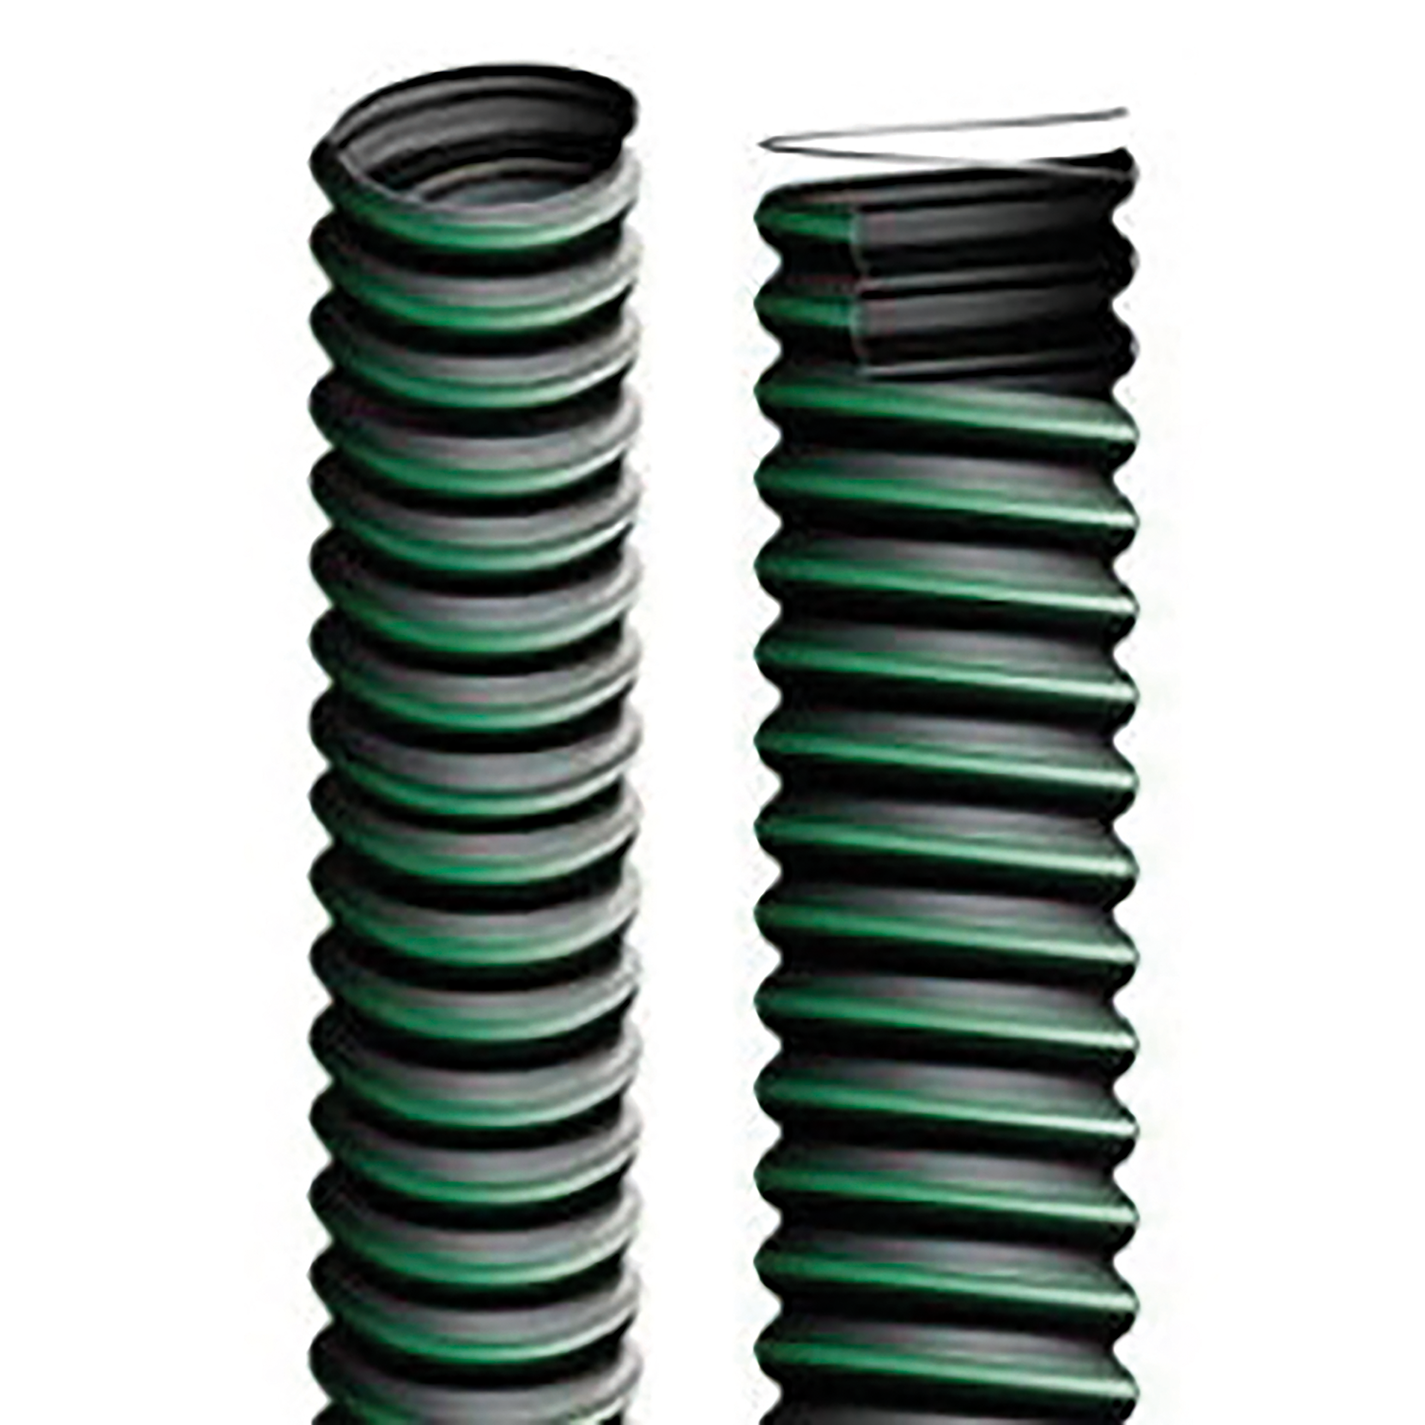 63mm ID Flexible Rubber Ducting